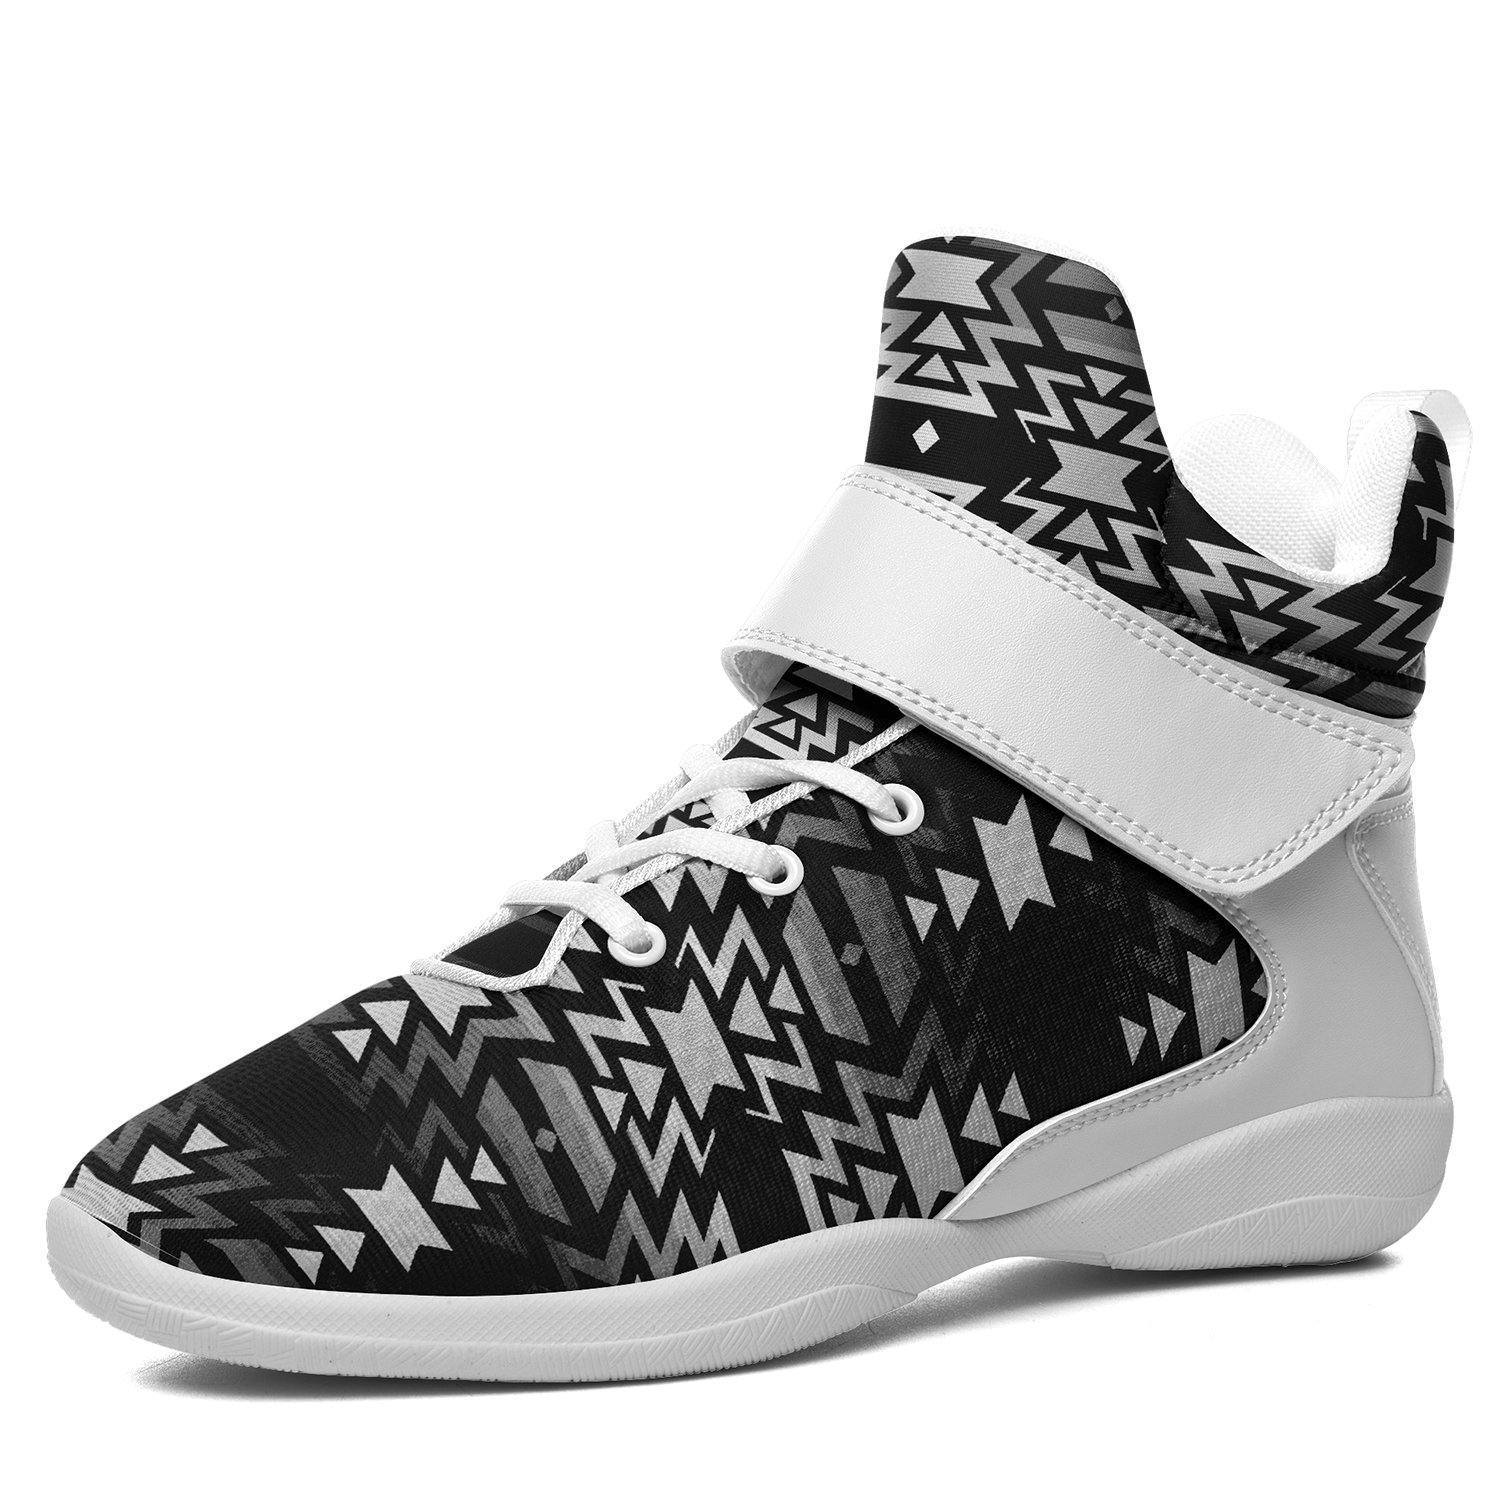 Black Fire Black and White Ipottaa Basketball / Sport High Top Shoes - White Sole 49 Dzine US Women 8.5 / EUR 40 White Sole with White Strap 